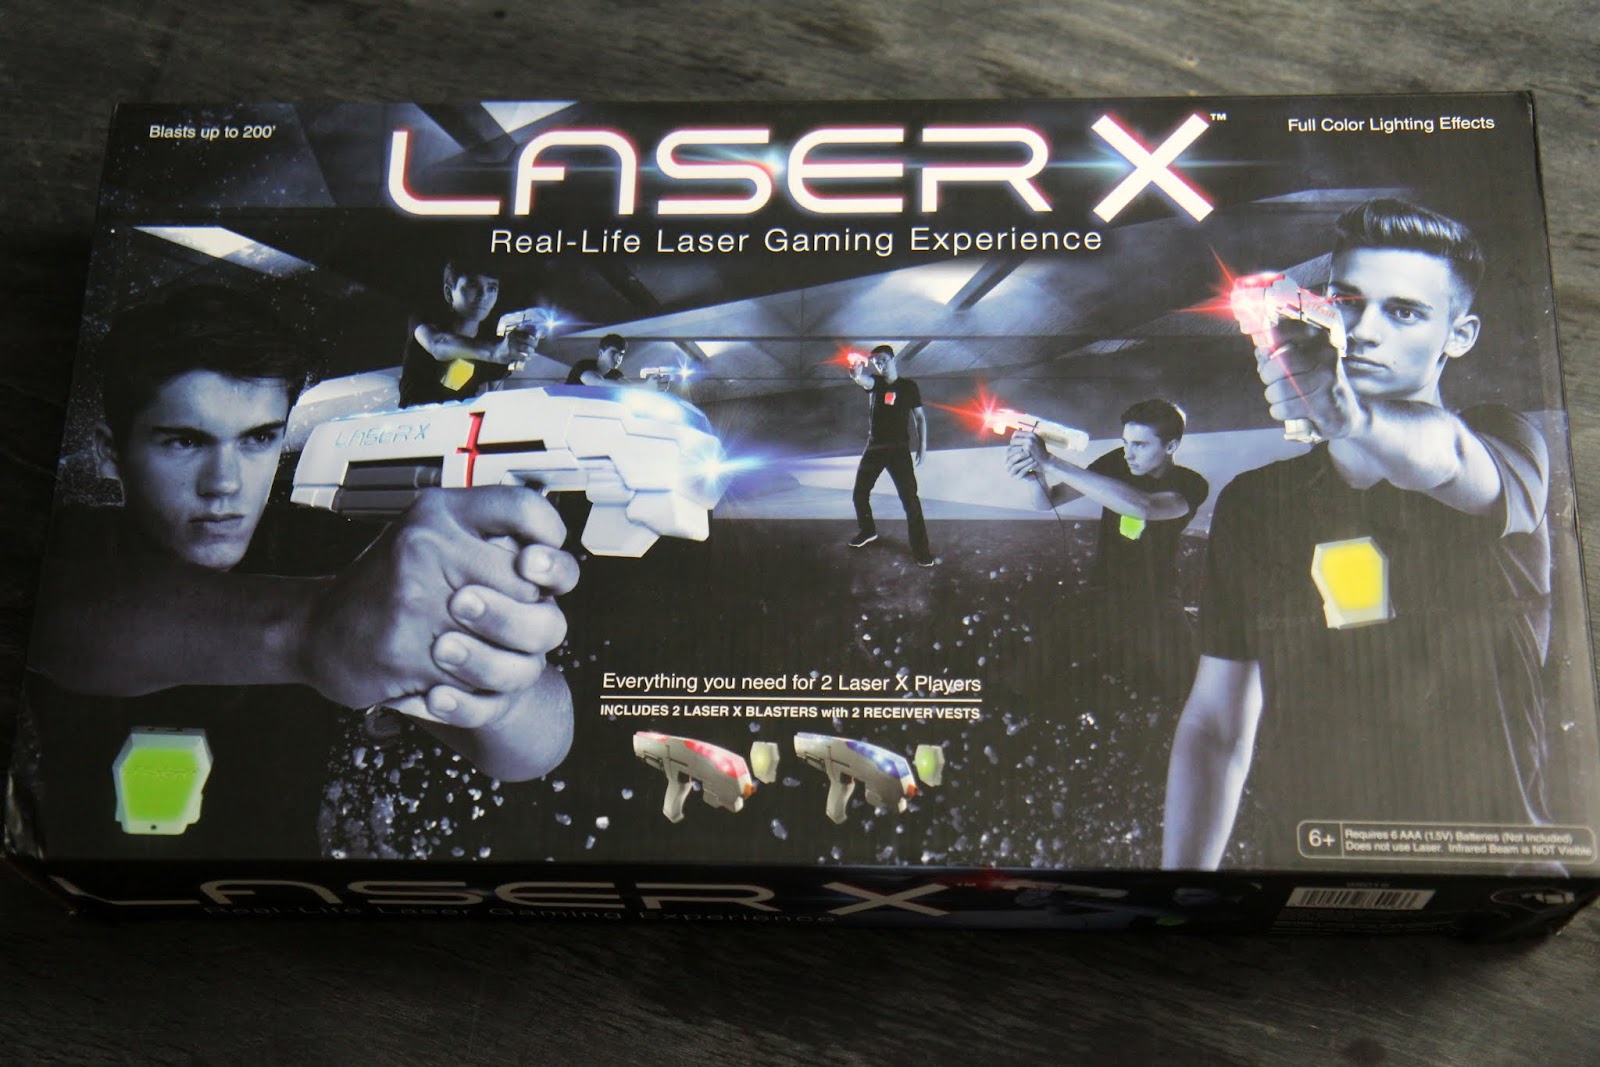 Laser X Revolution 2 player - toys & games - by owner - sale